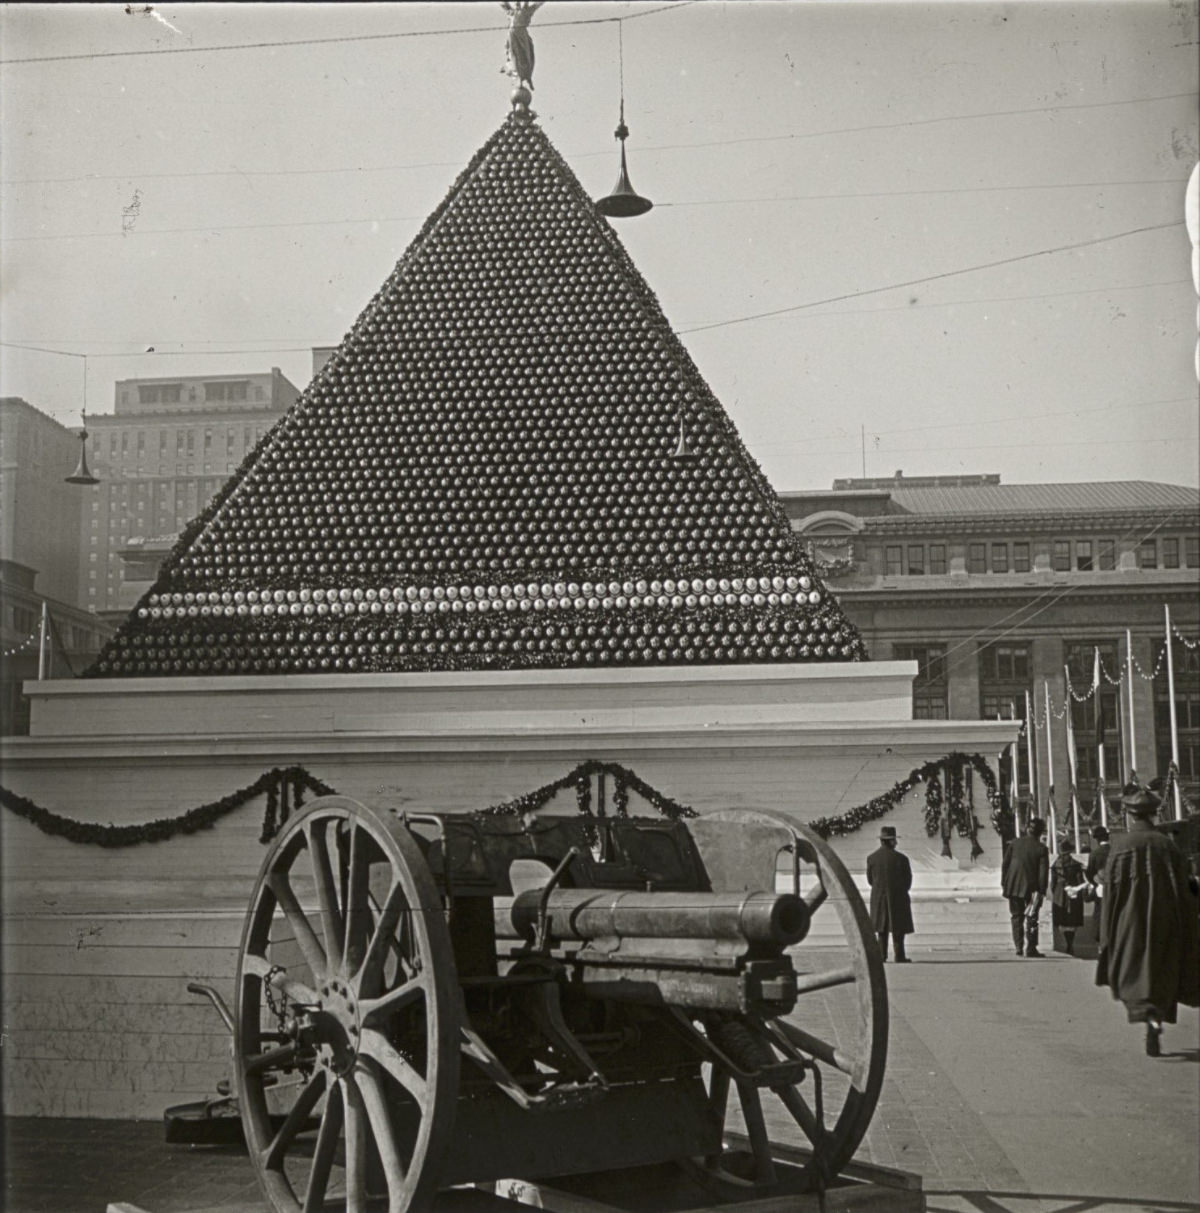 This is quite a visual–a pyramid built of what appears to be artillery shells, with a gun in the foreground.